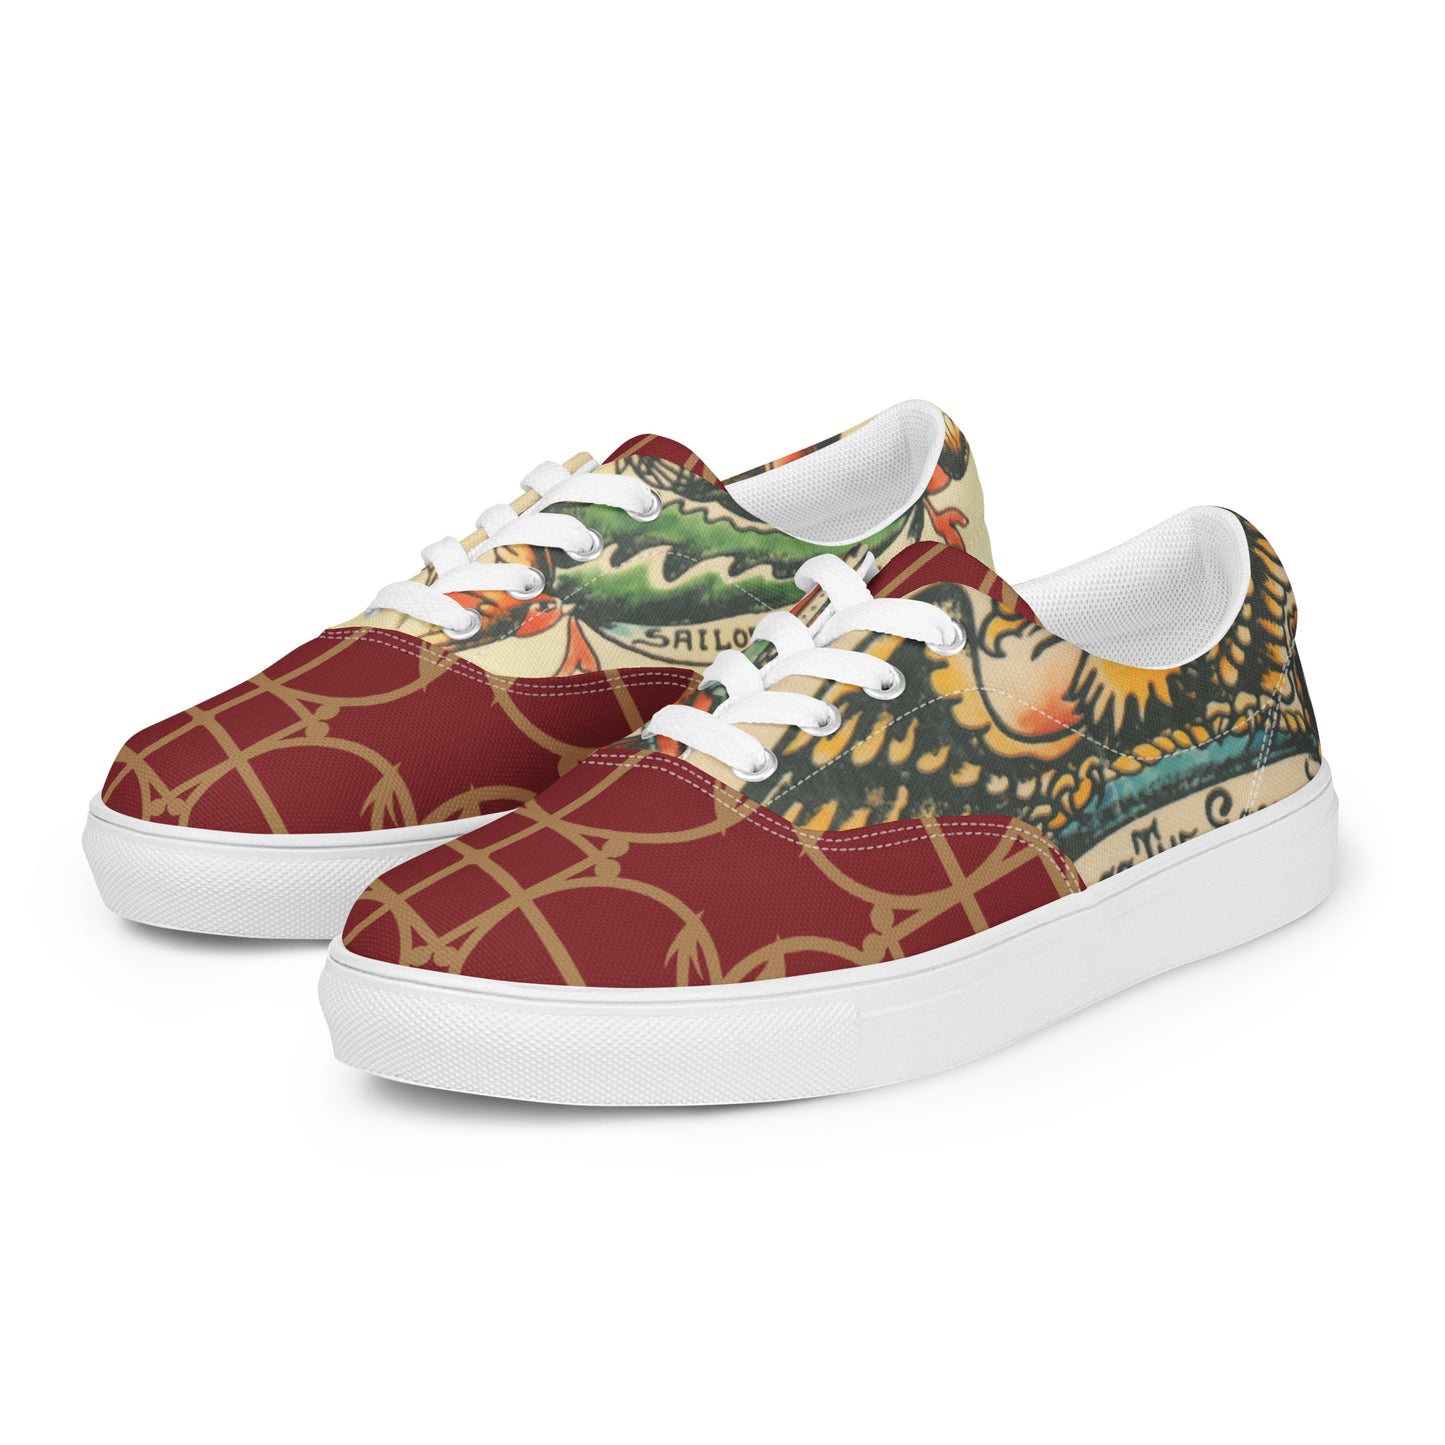 Tattoo Ole/ Nyhavn 17 - Women’s lace-up canvas shoes